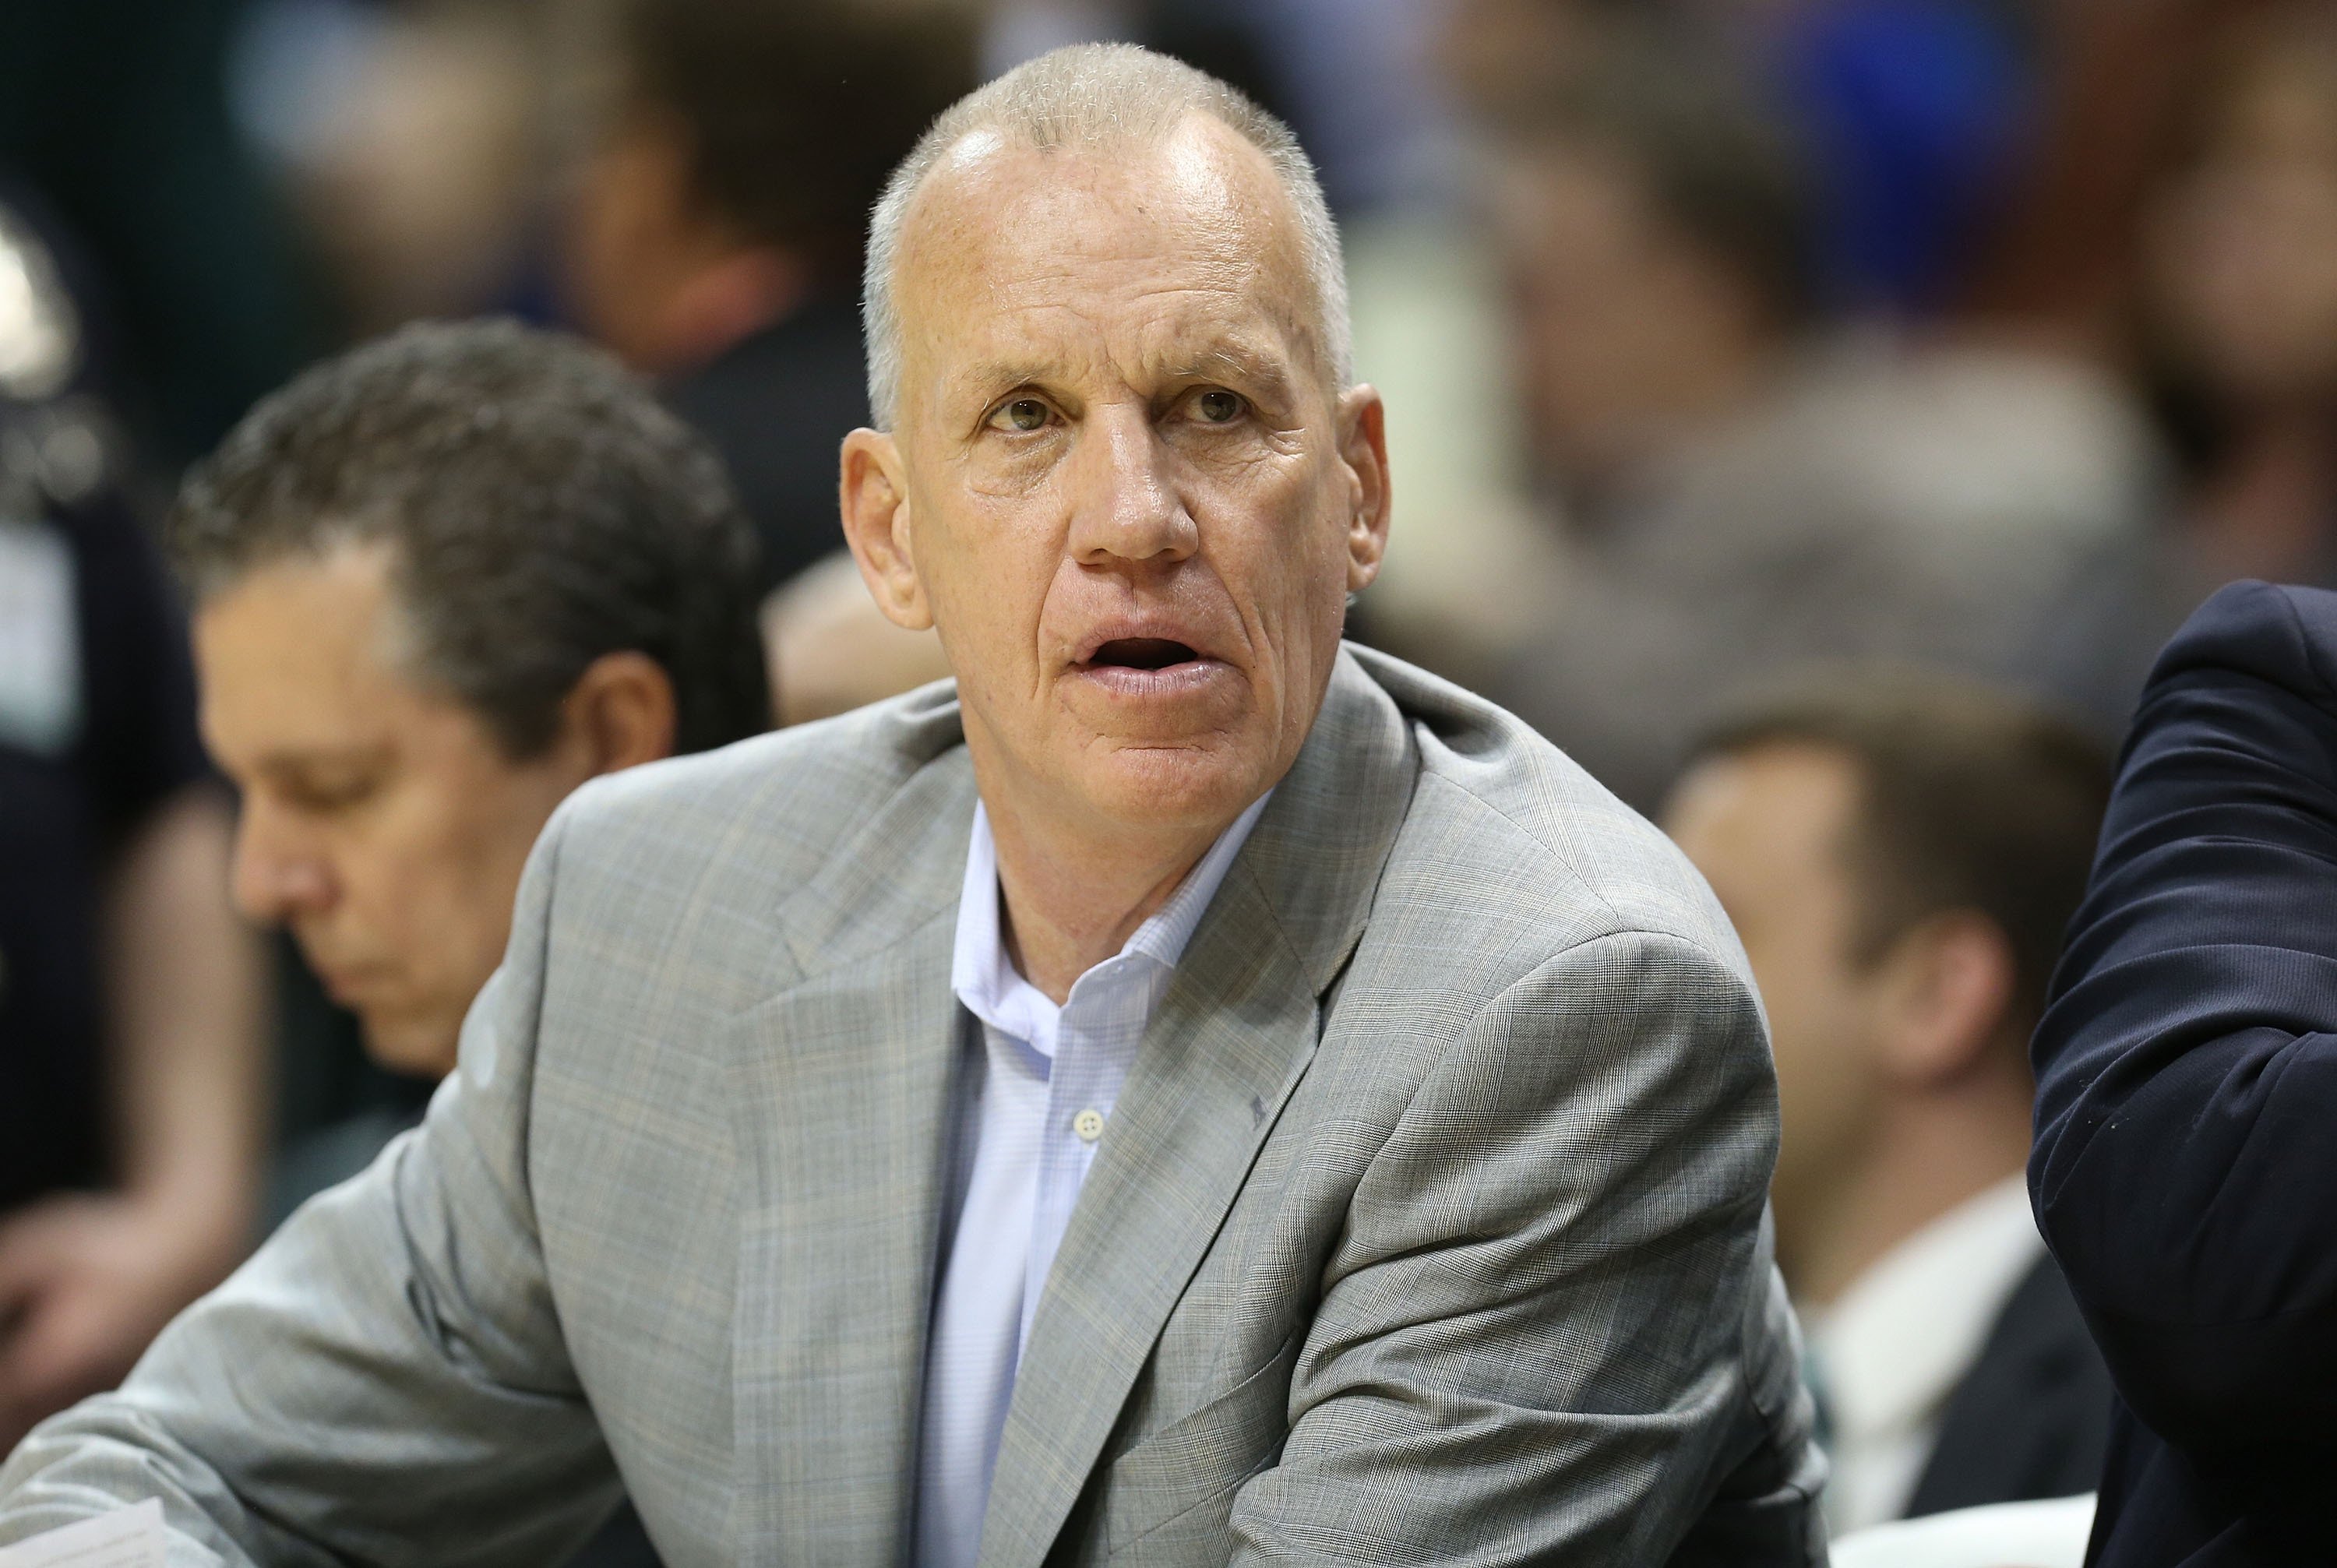 Doug Collins at Bankers Life Fieldhouse on April 17, 2013 in Indianapolis, Indiana. | Photo: Getty Images